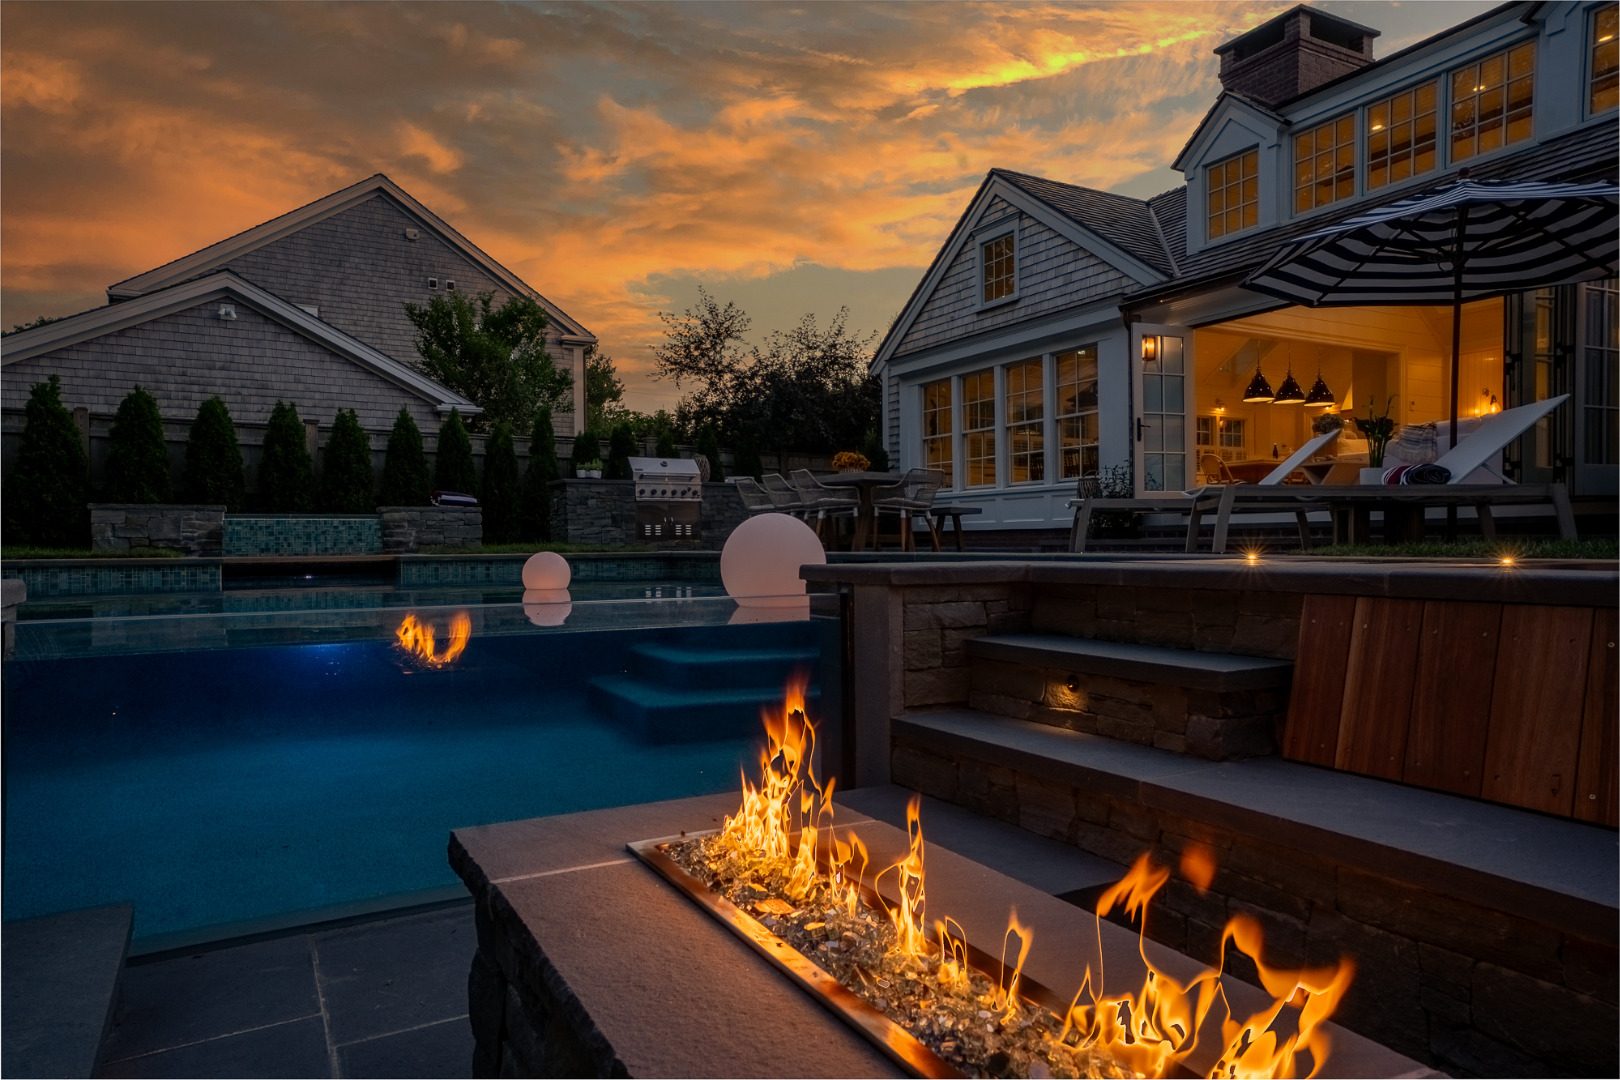 a house view with a sitting space fire pit and outdoor space